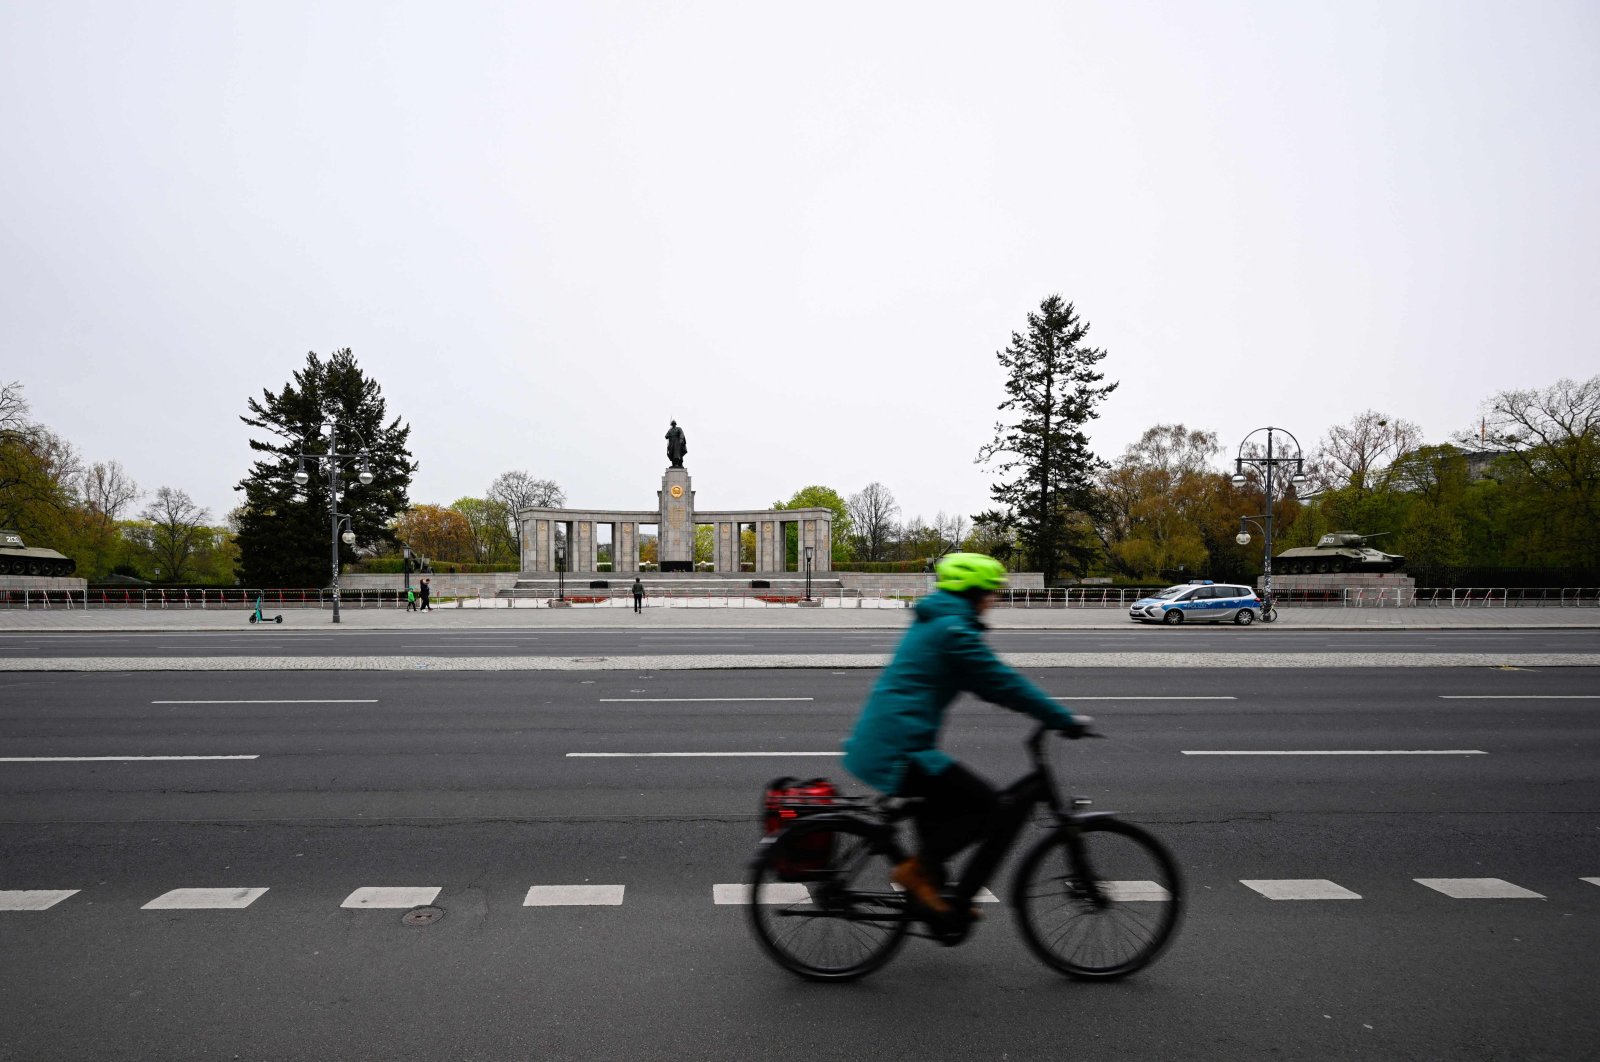 A cyclist passes by the Soviet War Memorial dedicated to the fallen soldiers in WWII in Berlin‘s Tiergarten district on April 21, 2022. (AFP Photo)